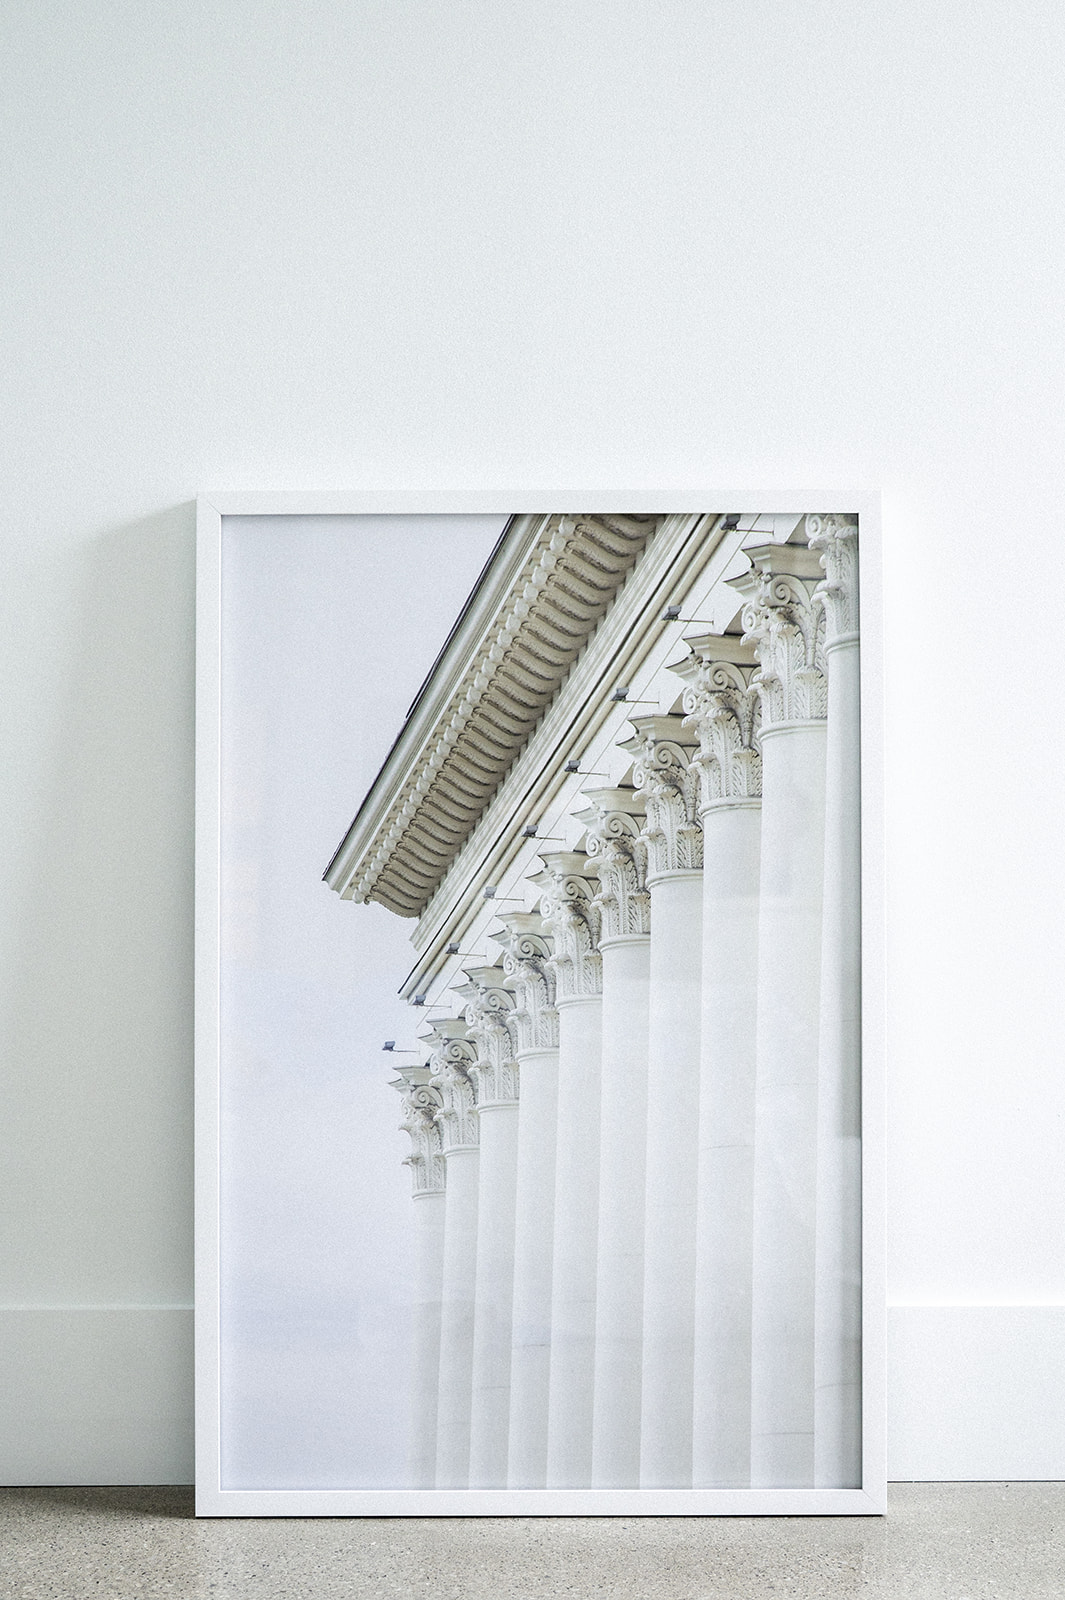 Large picture frame placed on ground, picture is of a marble building with large tall columbus